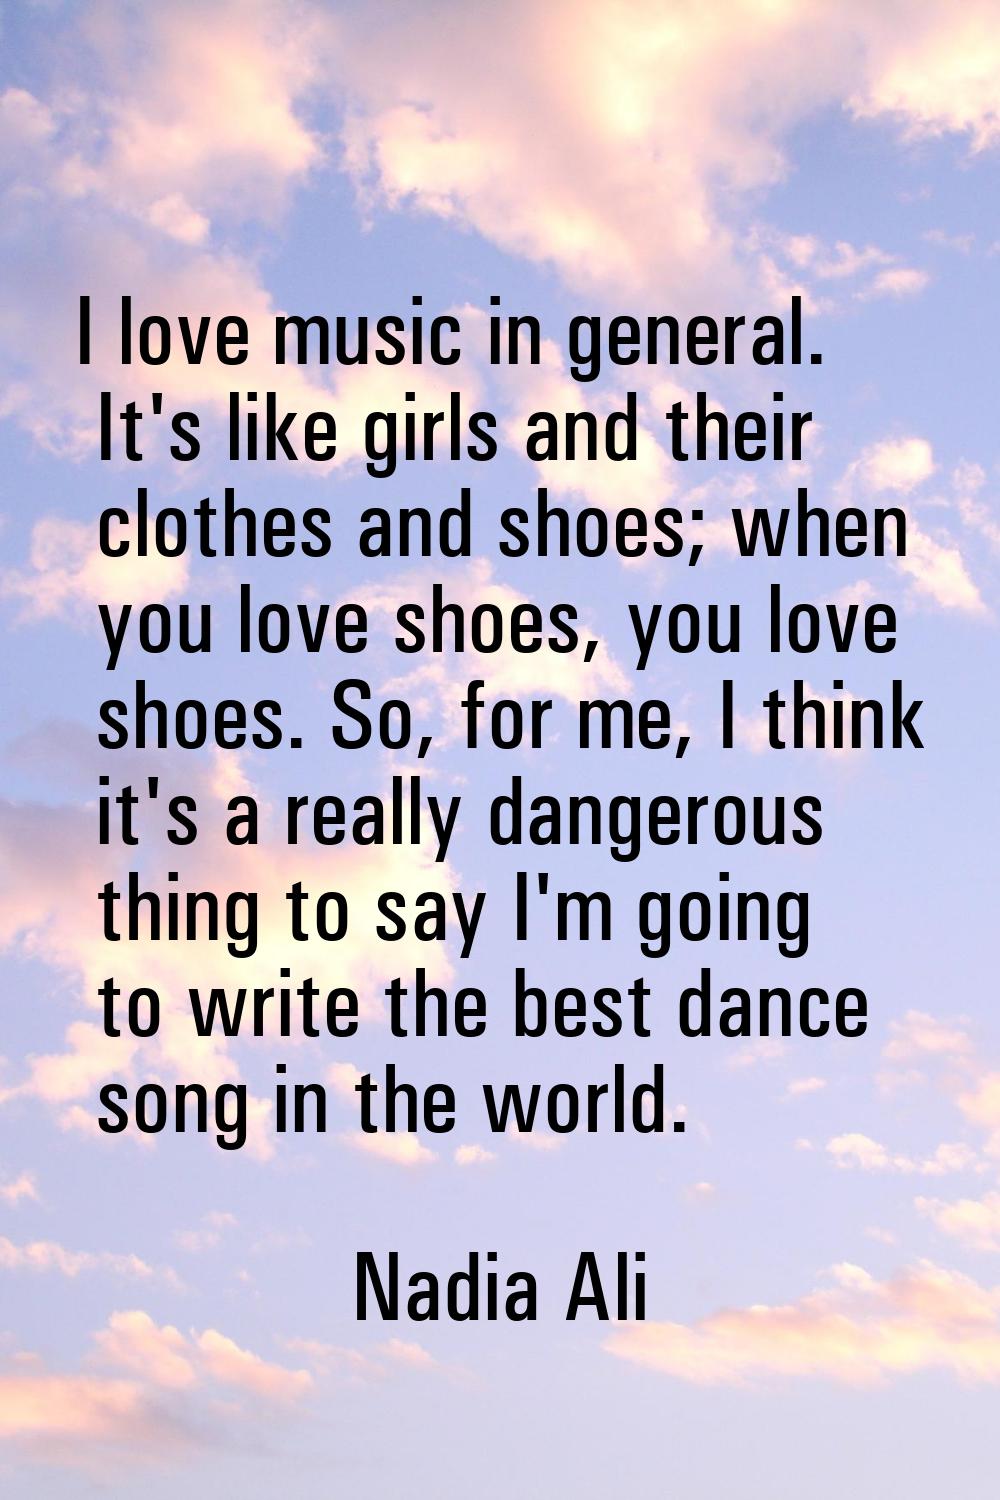 I love music in general. It's like girls and their clothes and shoes; when you love shoes, you love